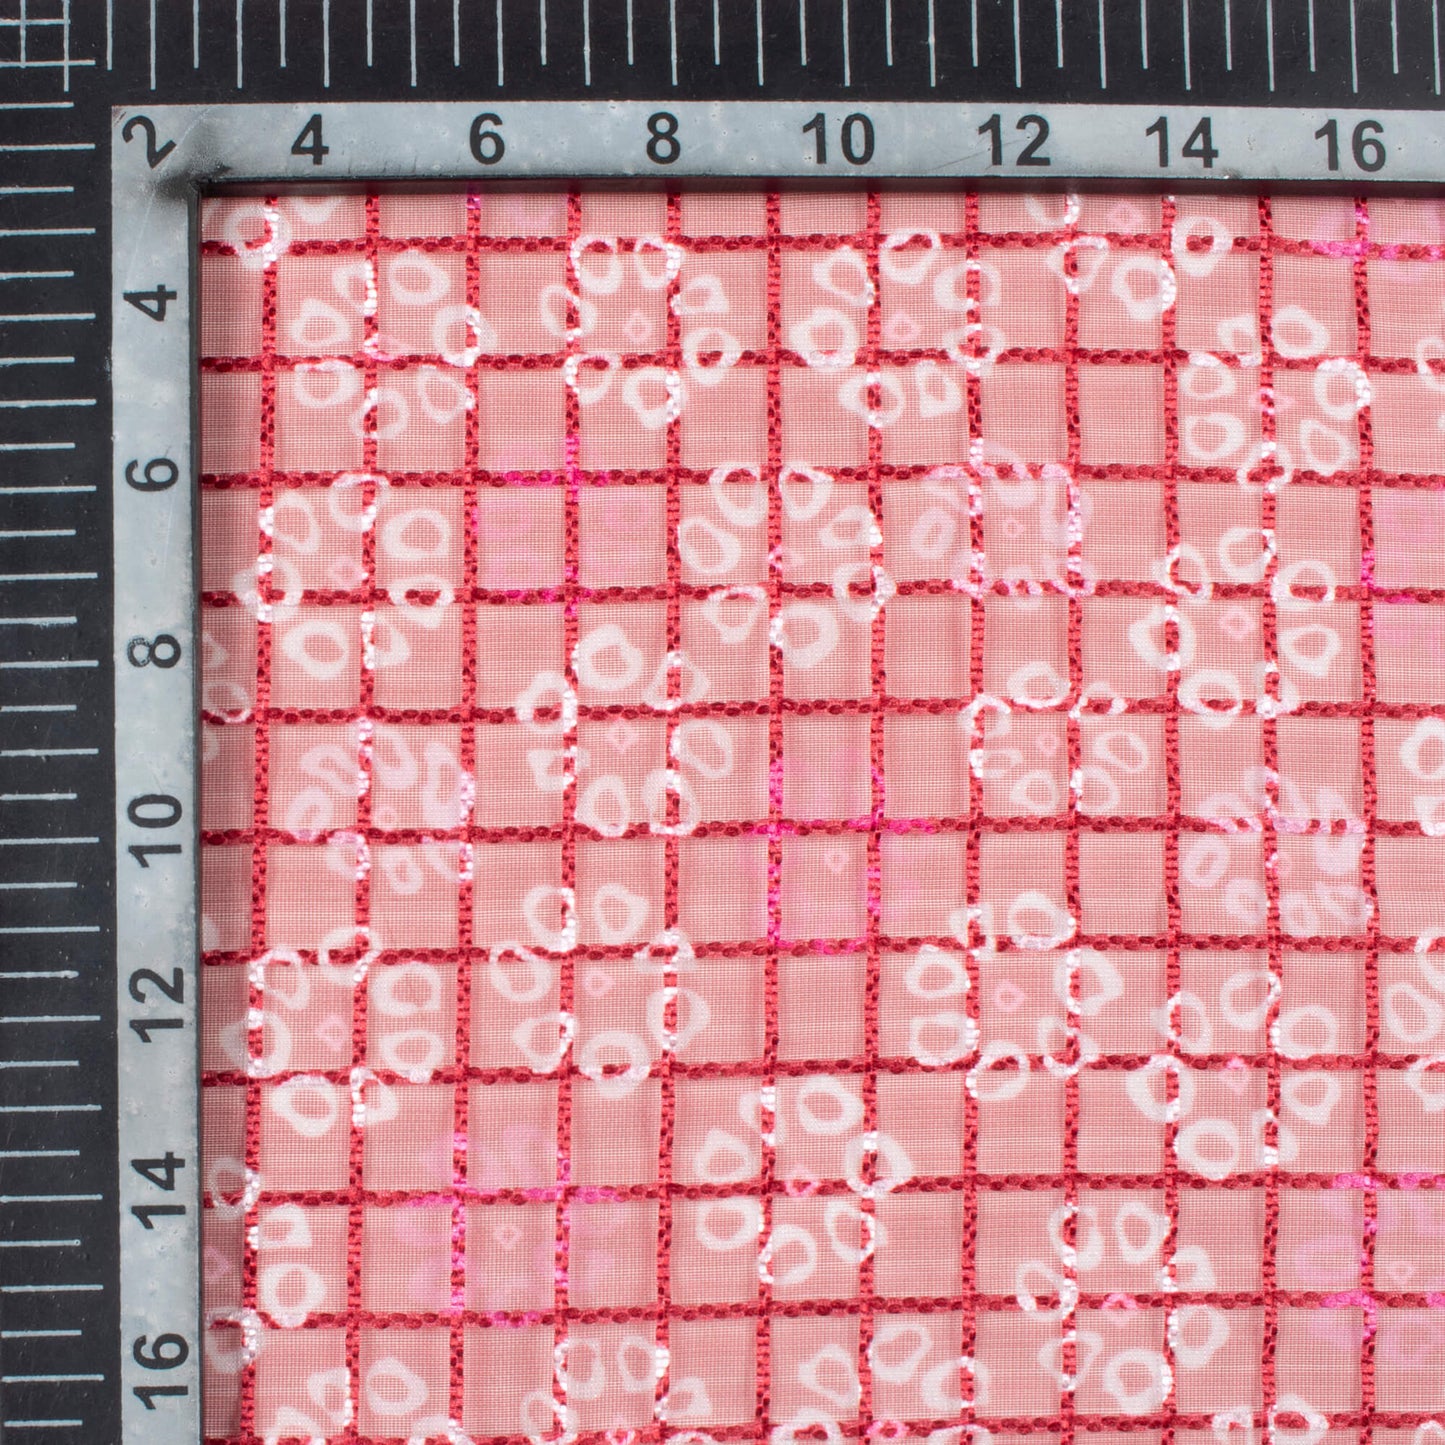 Deep Pink And White Floral Pattern Checks Embroidery Digital Print Organza Tissue Fabric